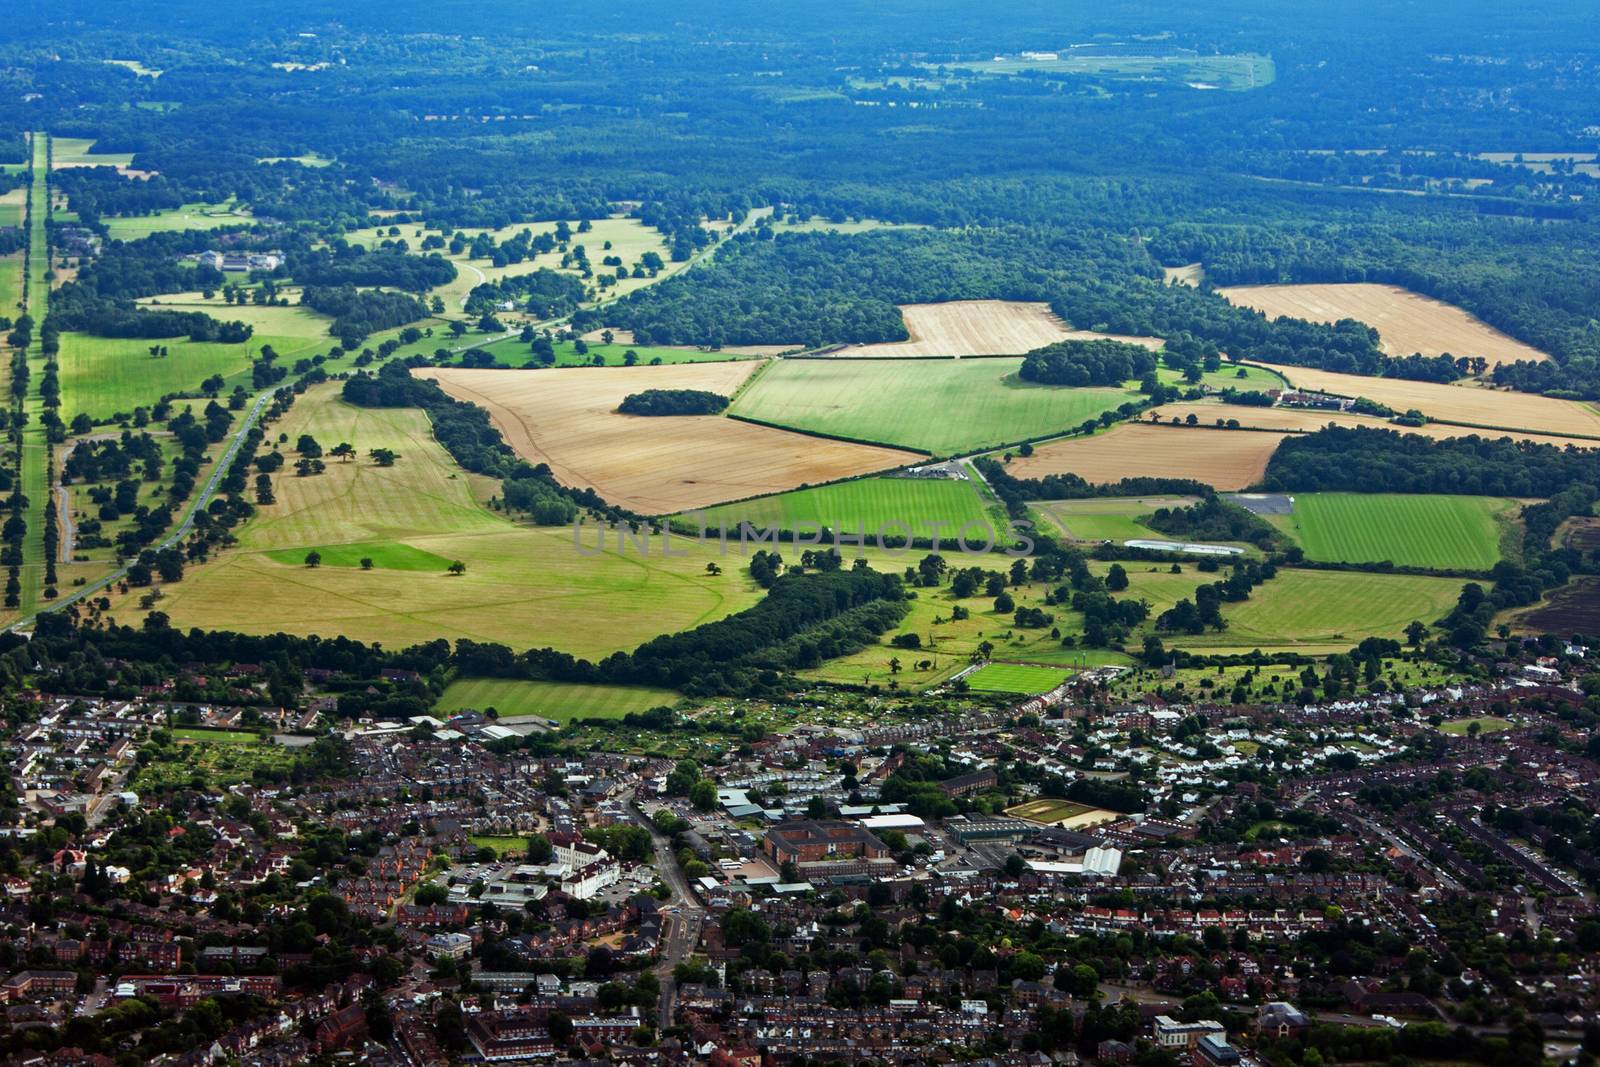 Aerial view of city town surrounded by farmland and forests.